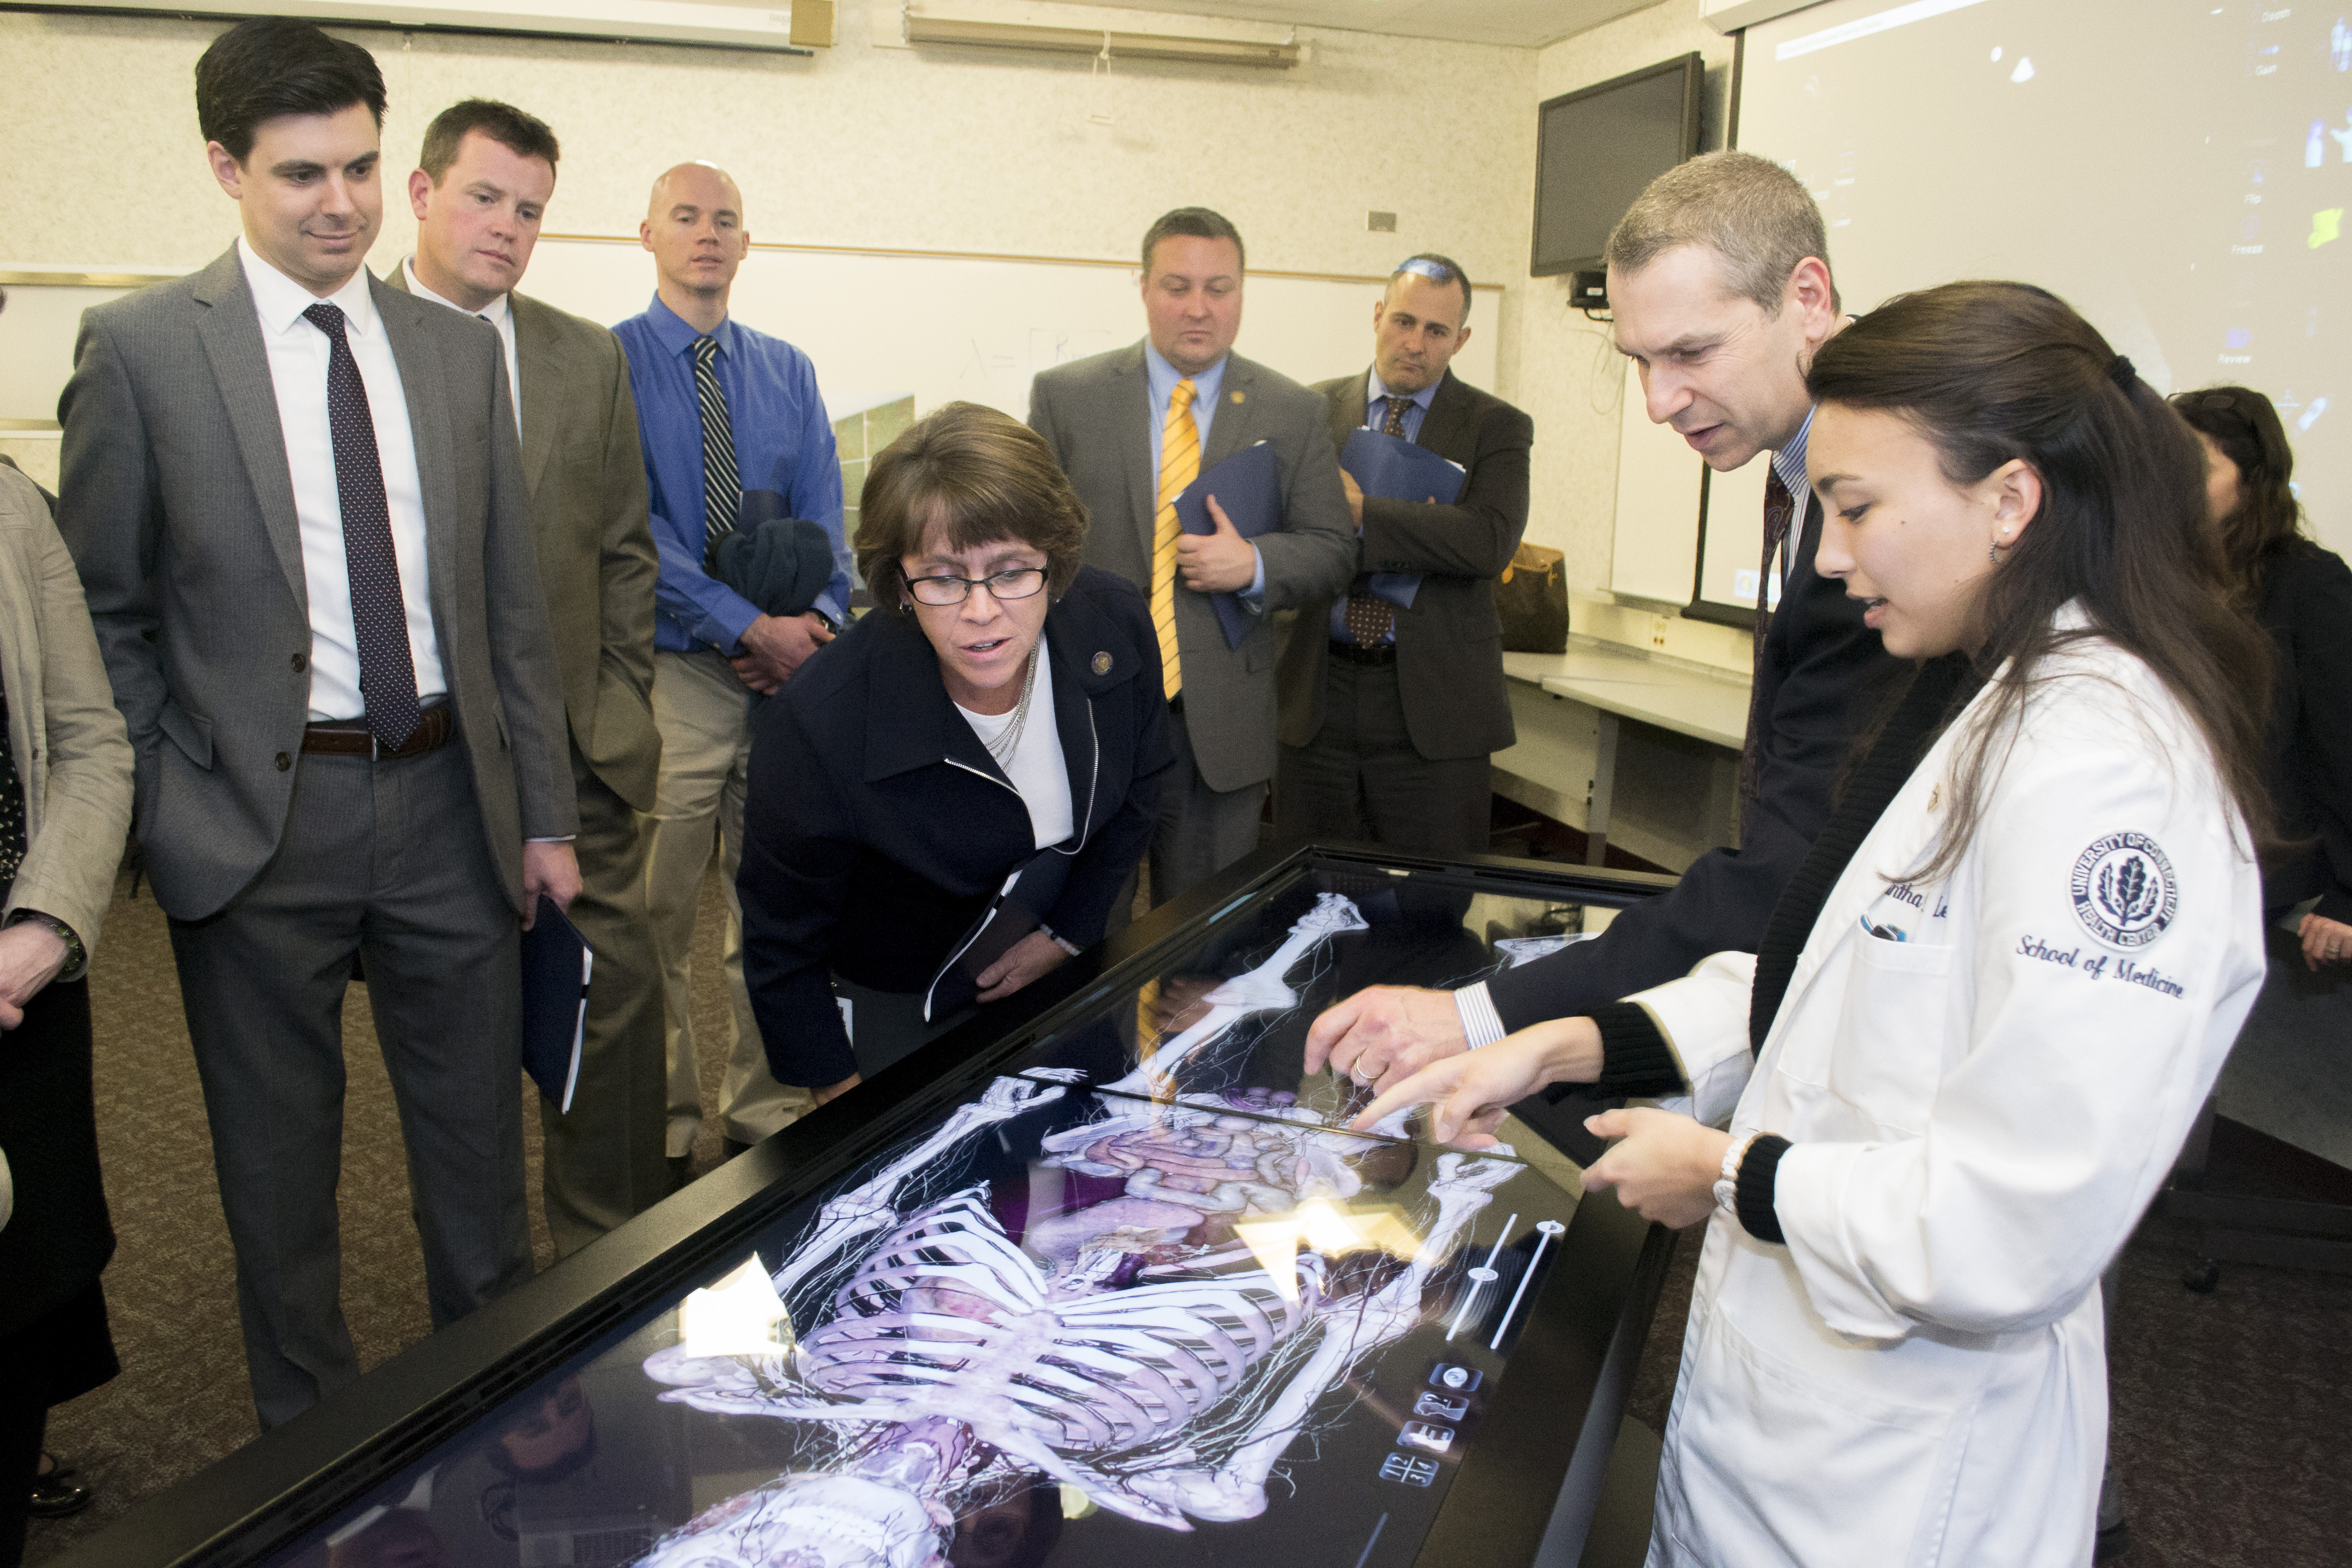 Connecticut state legislators listen as medical student Samantha Lee uses the Anatomage, virtual anatomy table, during a tour of the the recently renovated research and academic facilities at UConn Health. (Tina Encarnacion/UConn Health)